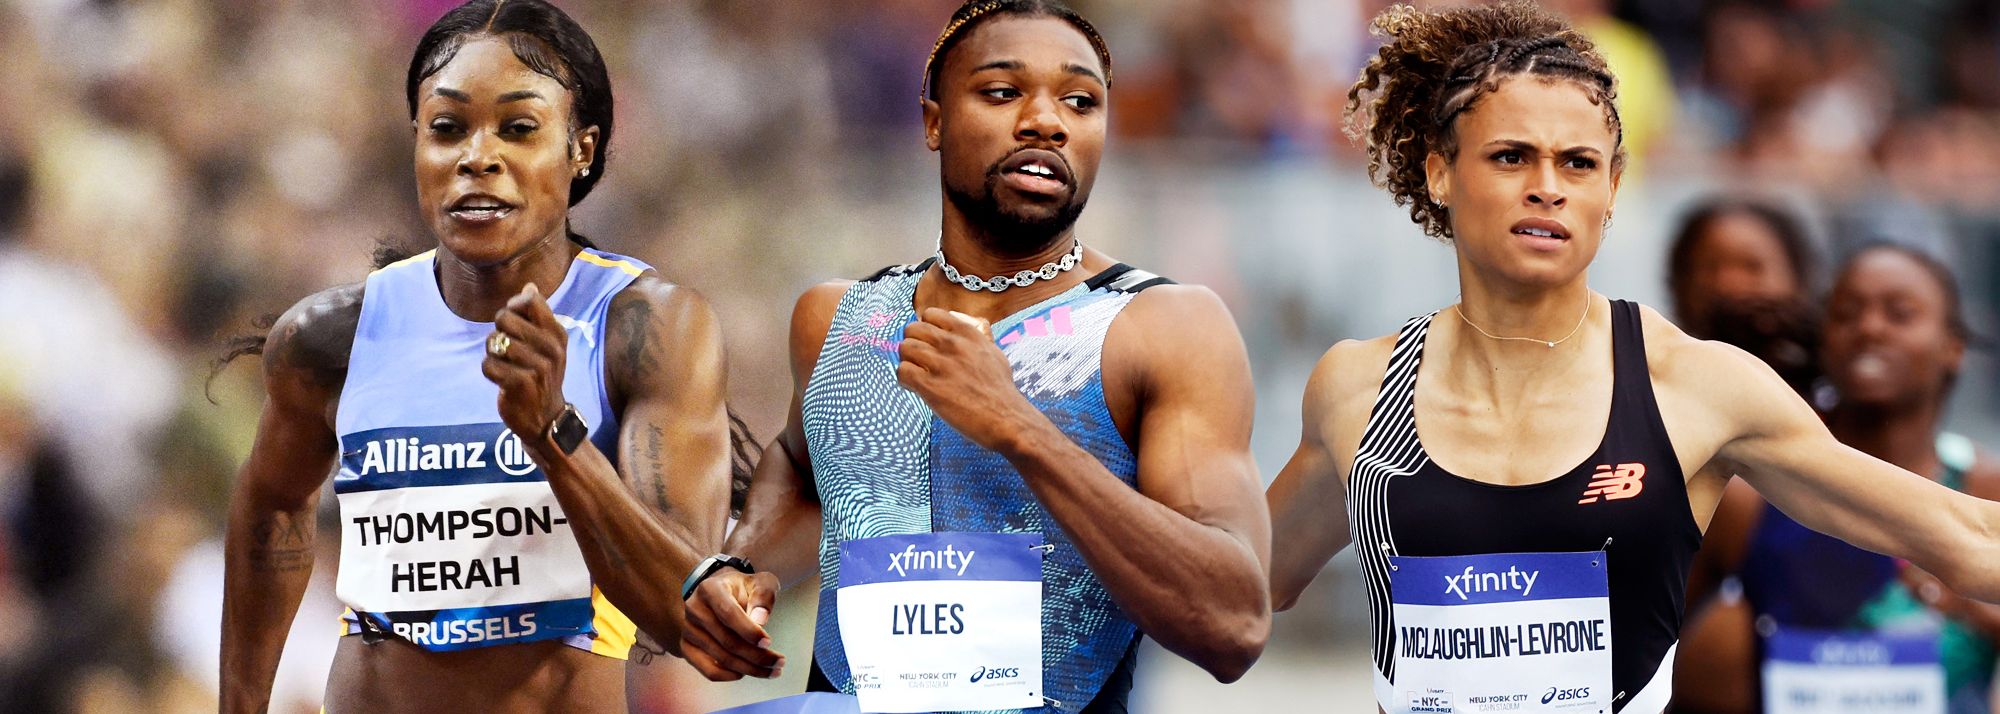 Global sprint champions Noah Lyles, Sydney McLaughlin-Levrone and Elaine Thompson-Herah are among the star performers heading to the USATF New York City Grand Prix